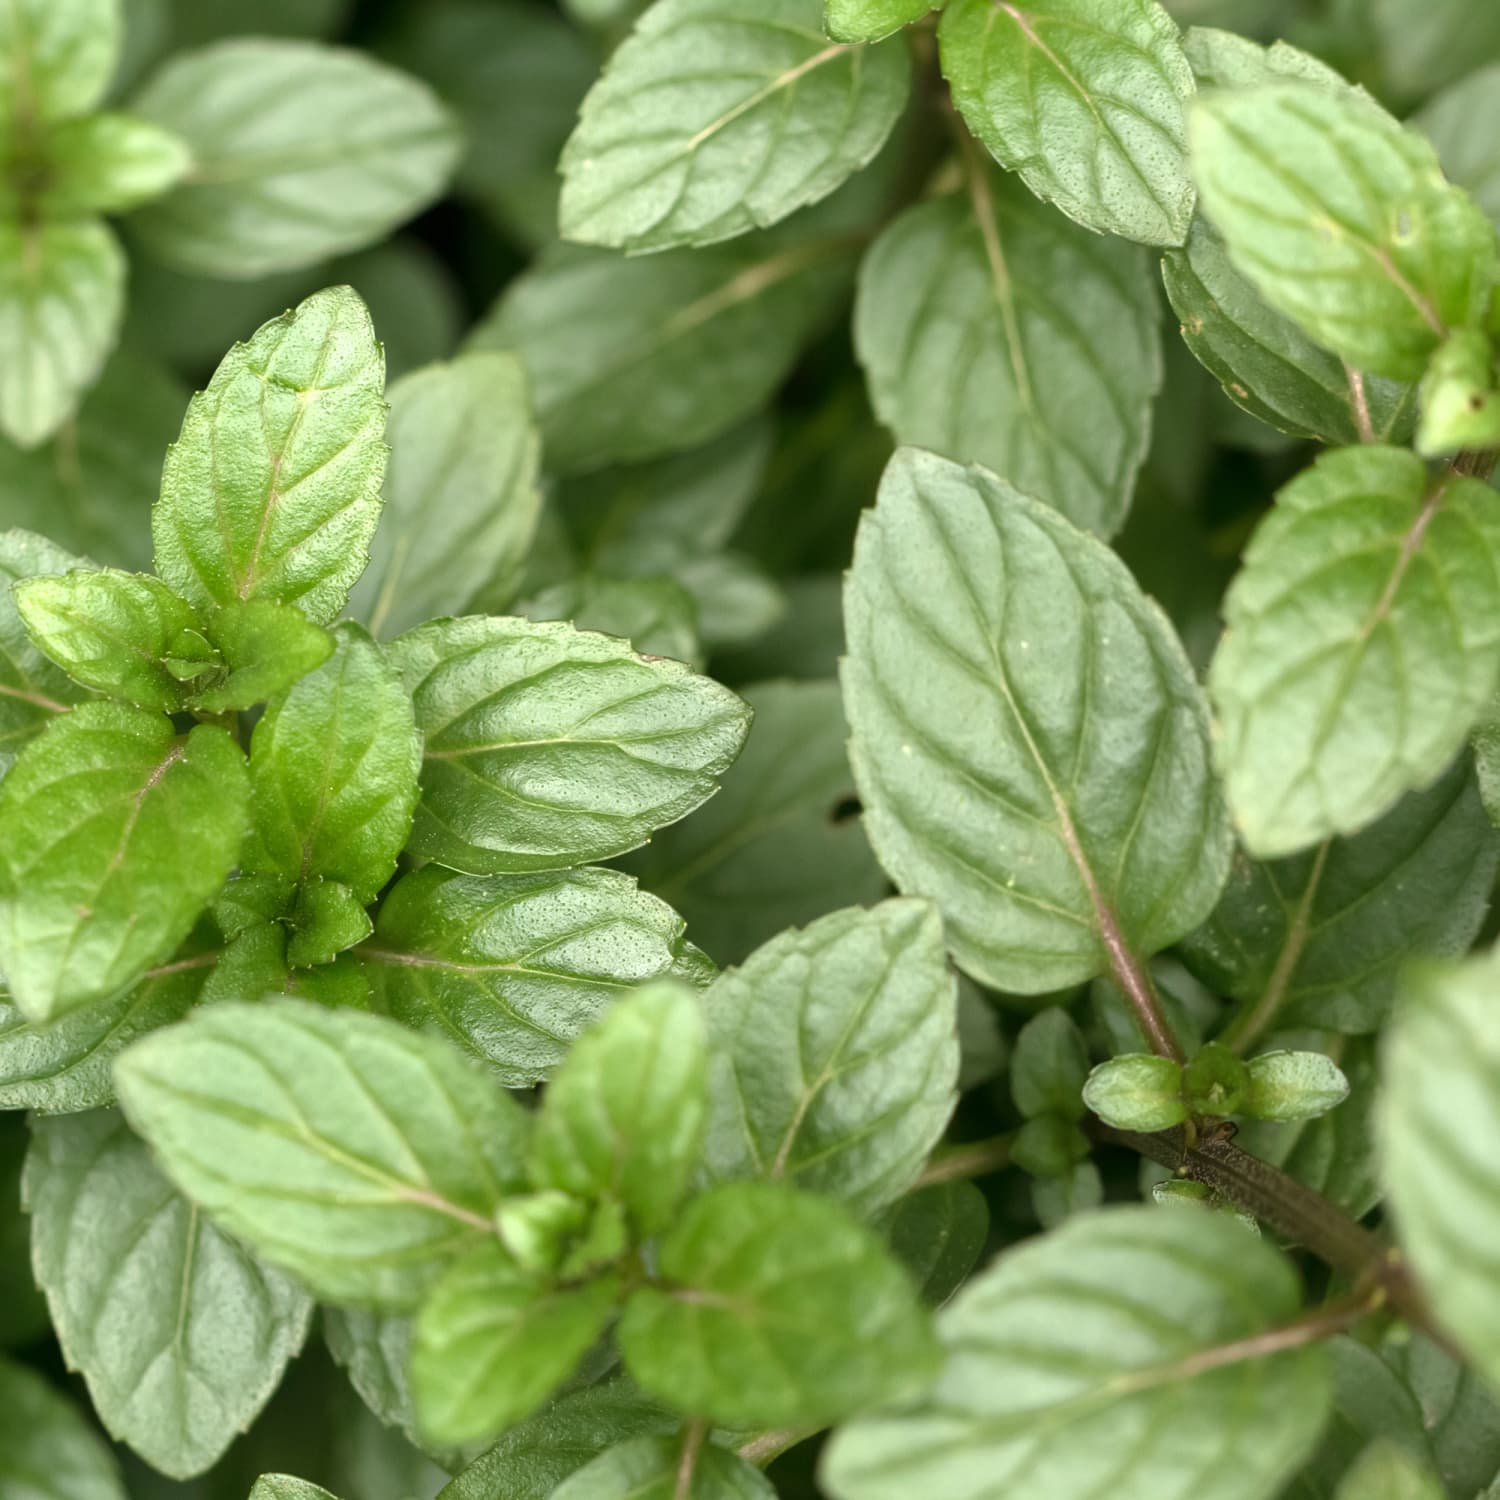 6 Uses for Mint - 6 Fun Mint-Based Household & Beauty Solutions